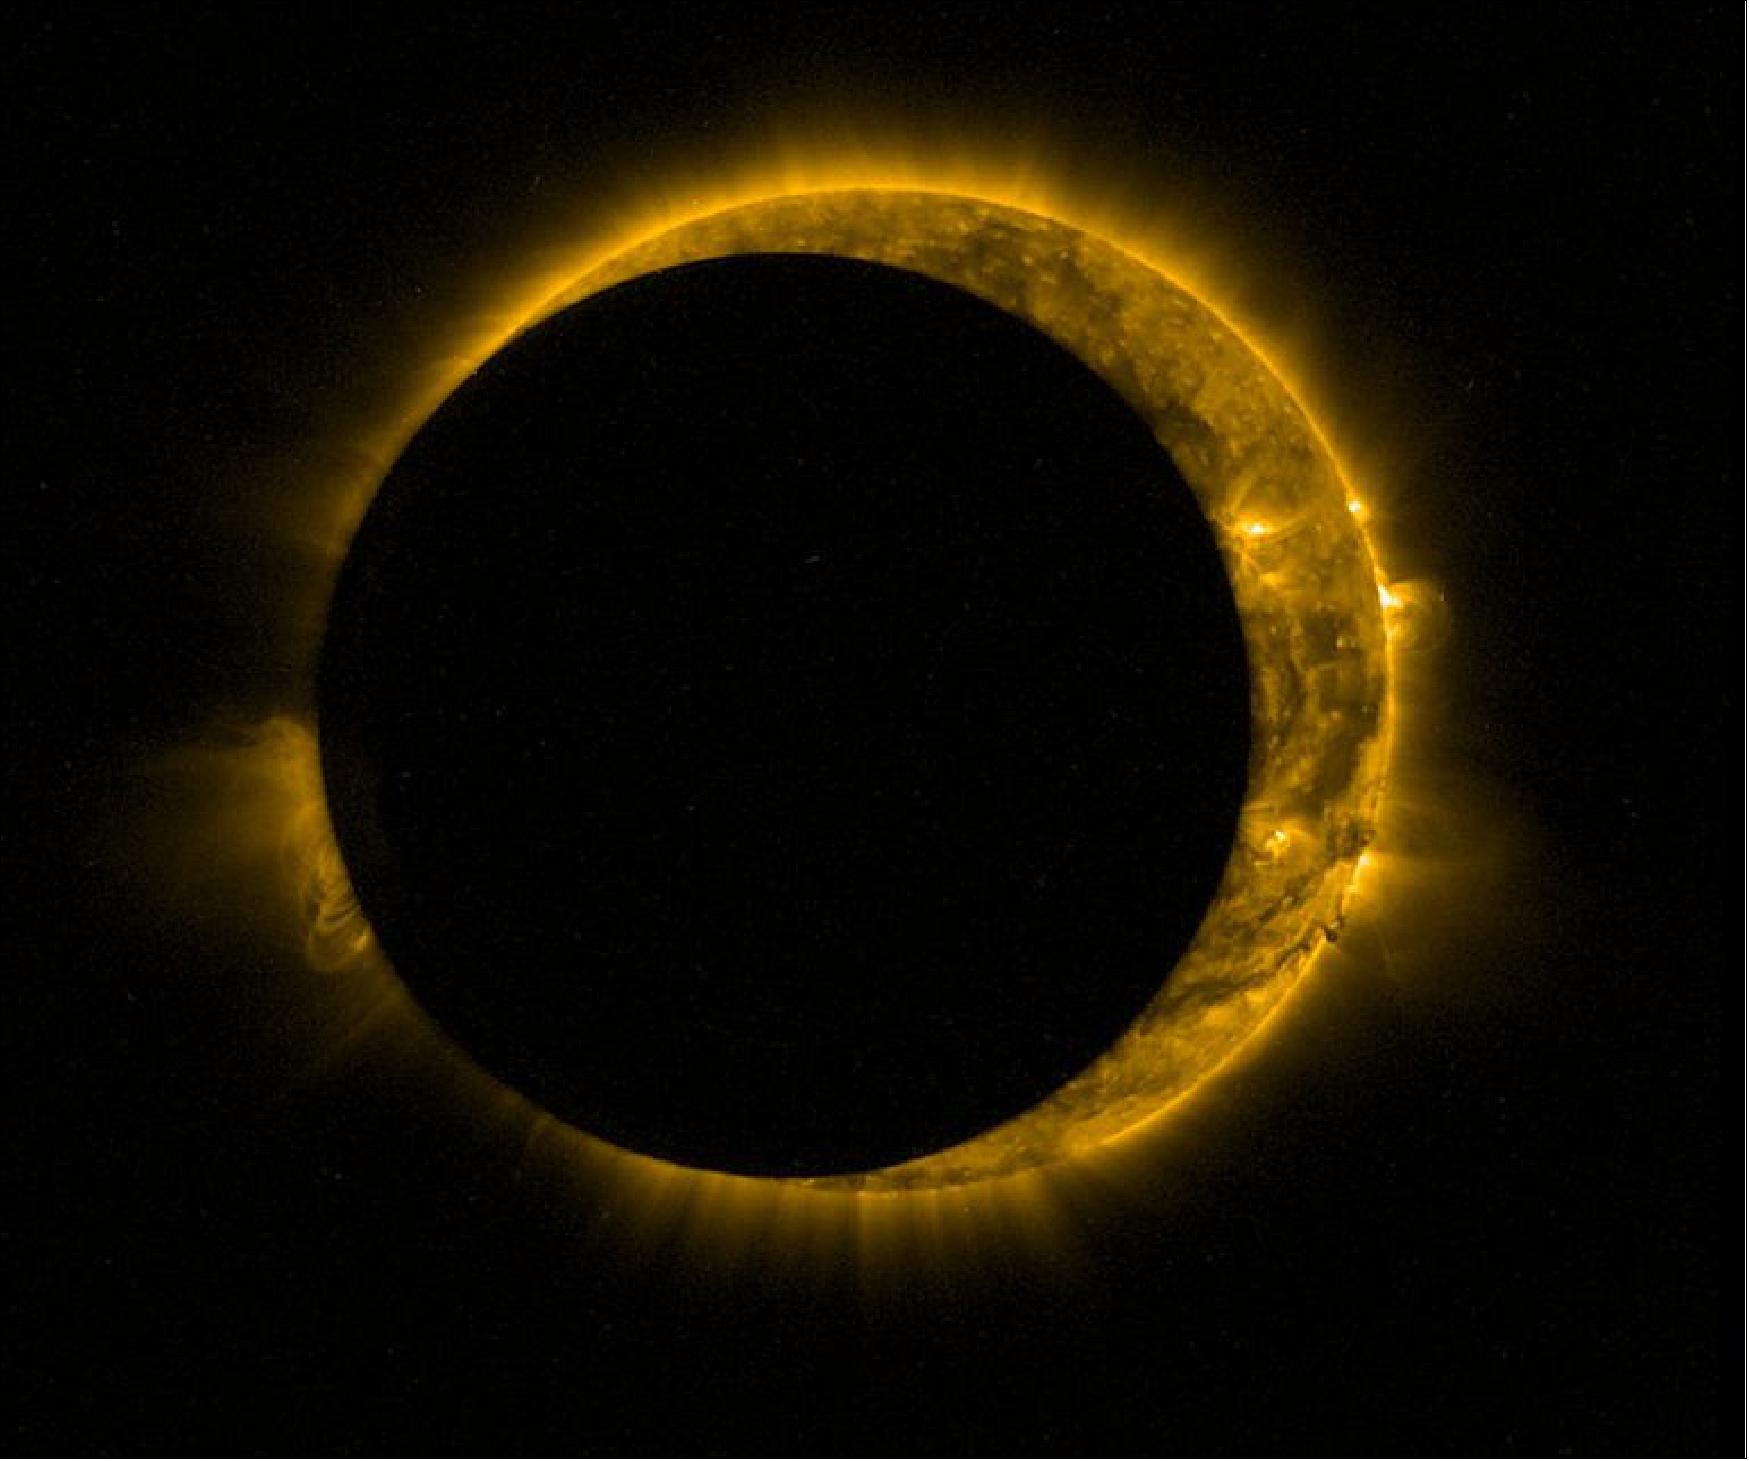 Figure 32: This partial eclipse was captured with the SWAP imager at 06:32 GMT on 13 September 2015. SWAP views the solar disc at extreme UV wavelengths to capture the turbulent surface of the Sun and its swirling corona – a glimpse of which can be seen in the background [image credit: ESA, ROB (Royal Observatory of Belgium)]